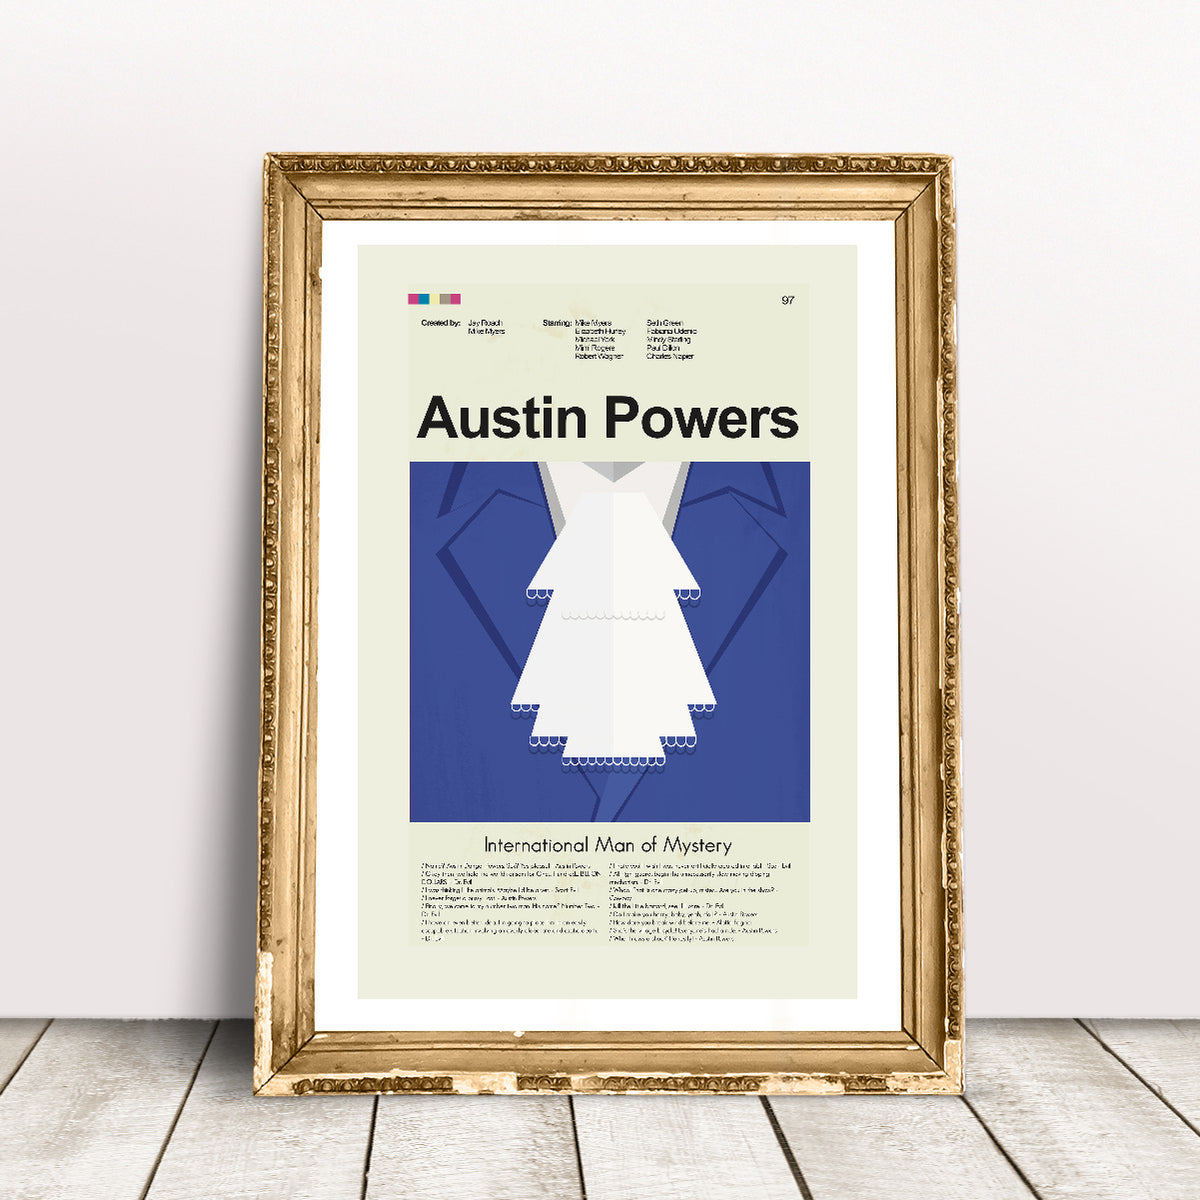 Austin Powers: International Man of Mystery - Blue Suit | 12"x18" or 18"x24" Print only